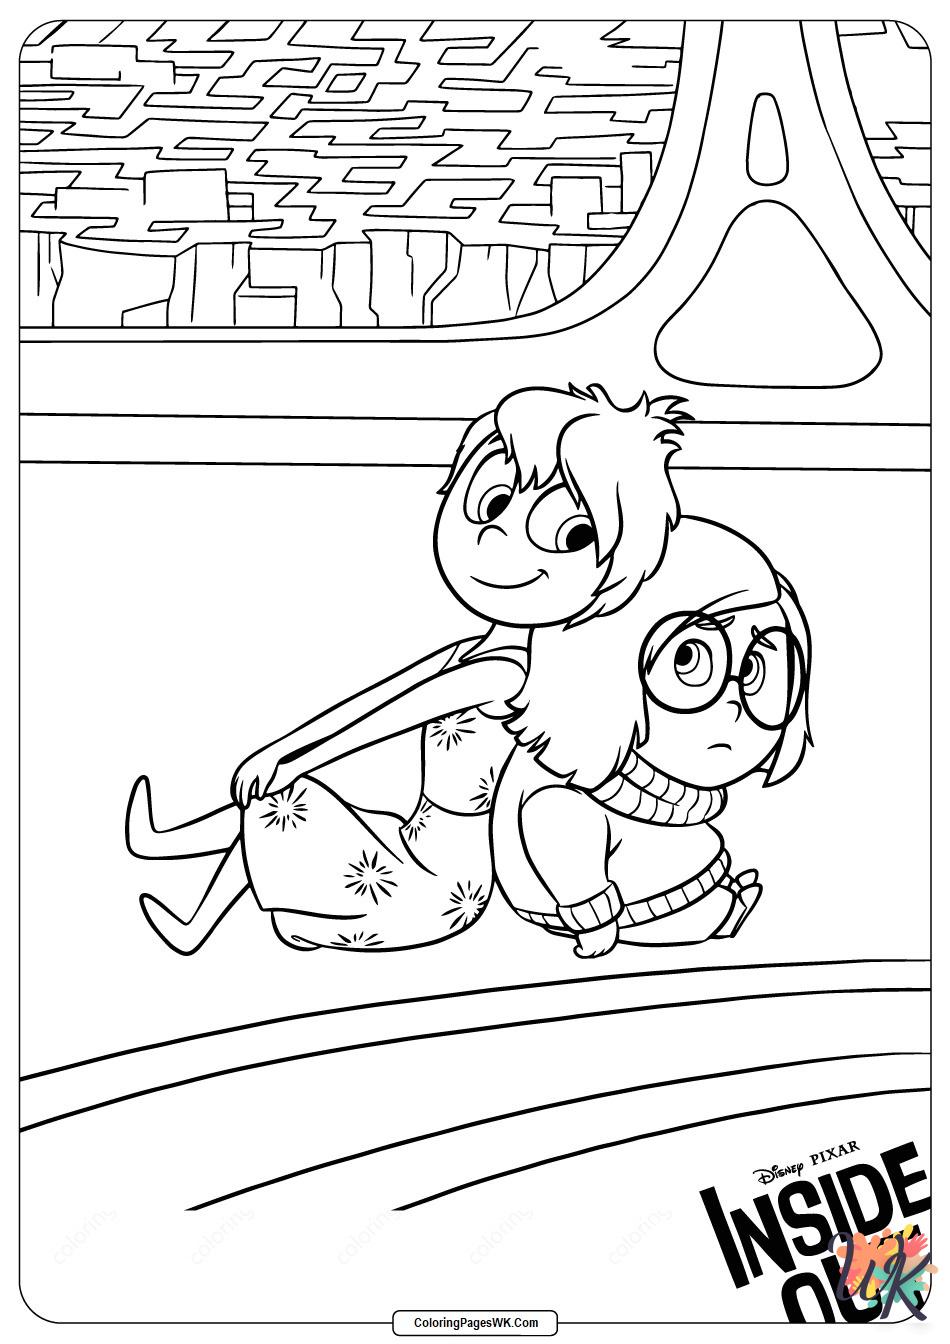 Inside Out coloring pages easy